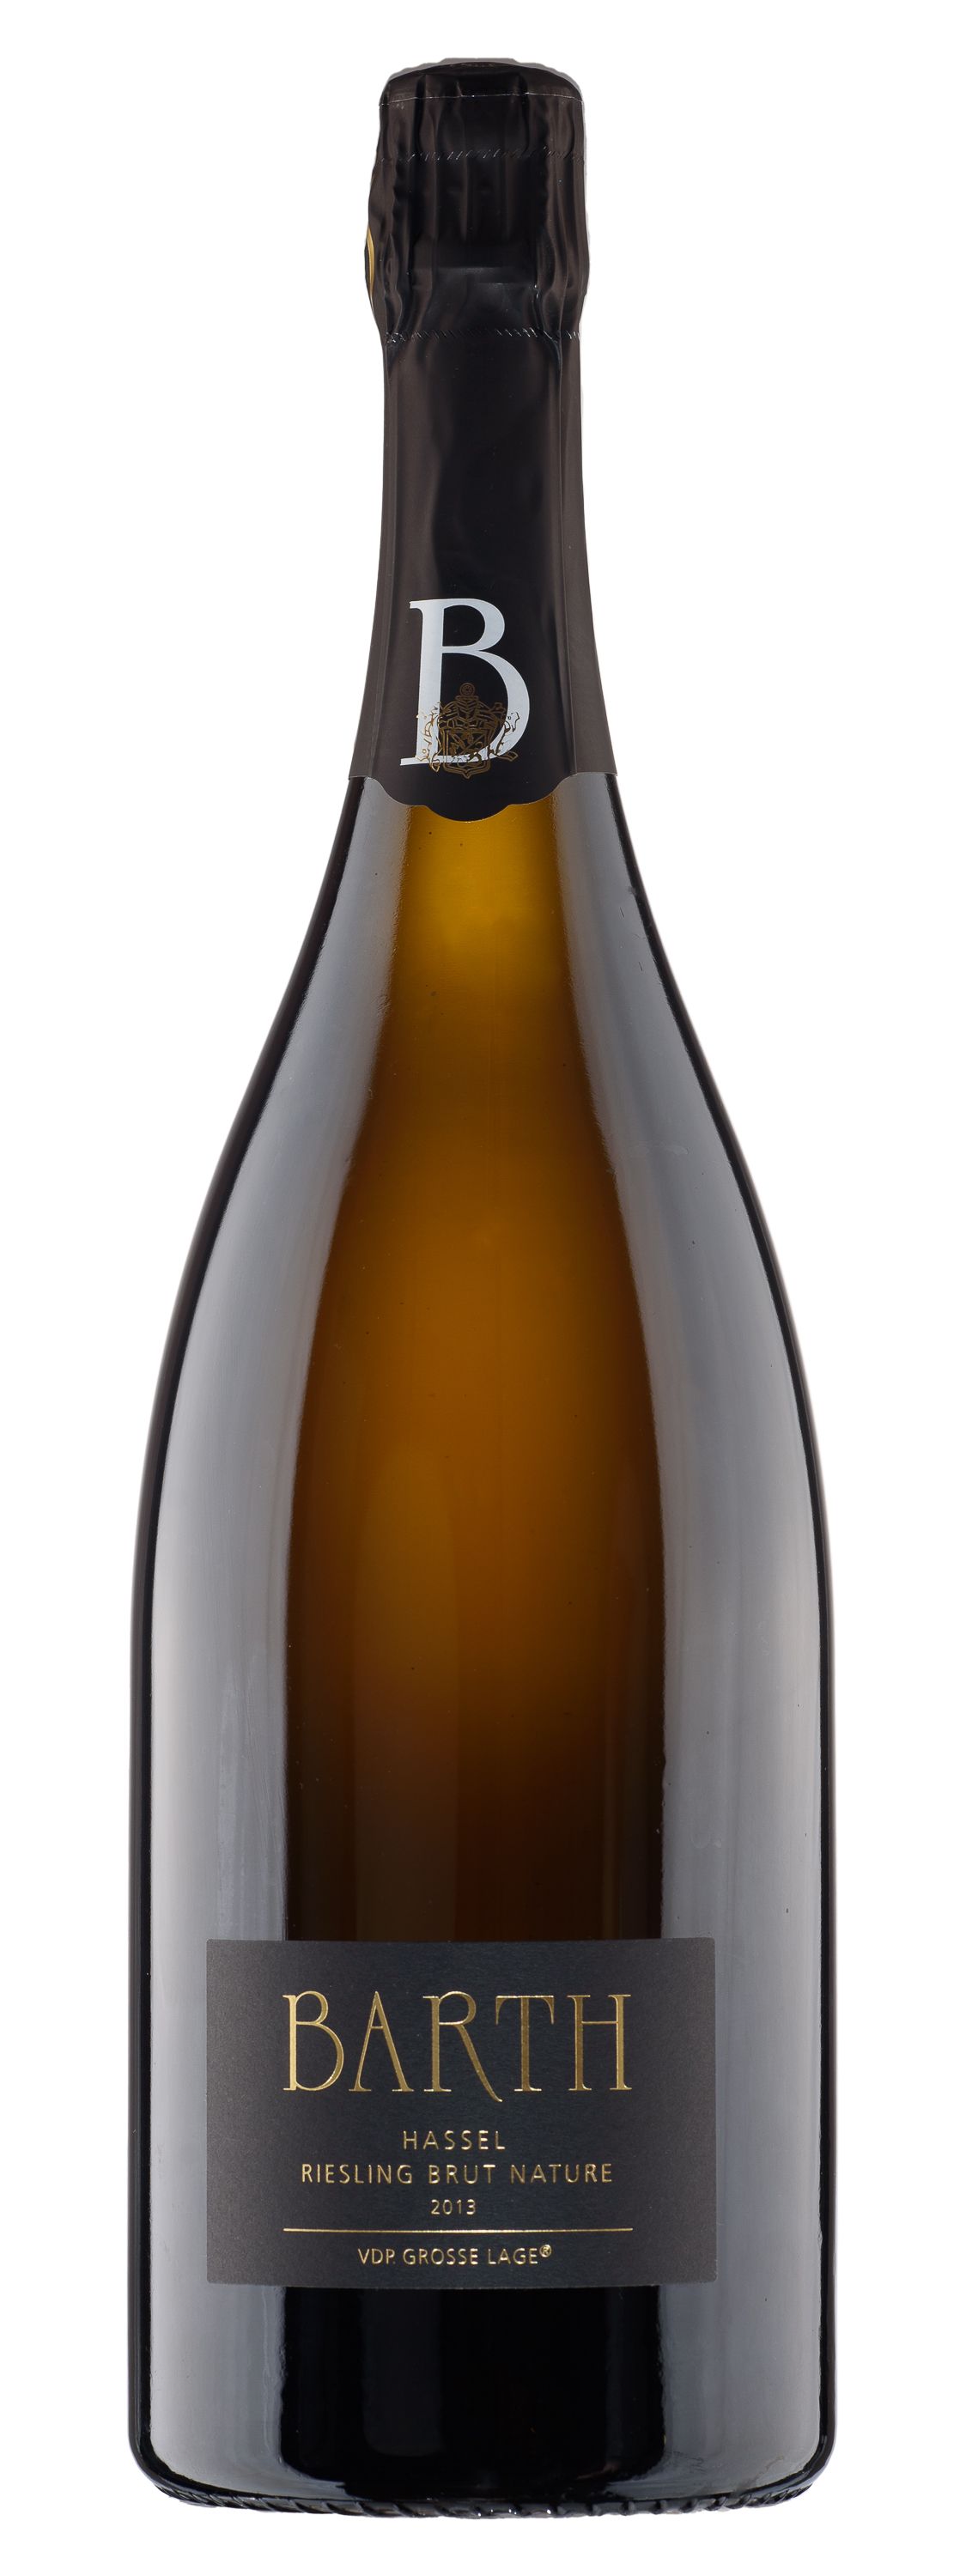 Barth, Hassel Riesling Brut Nature, 2013